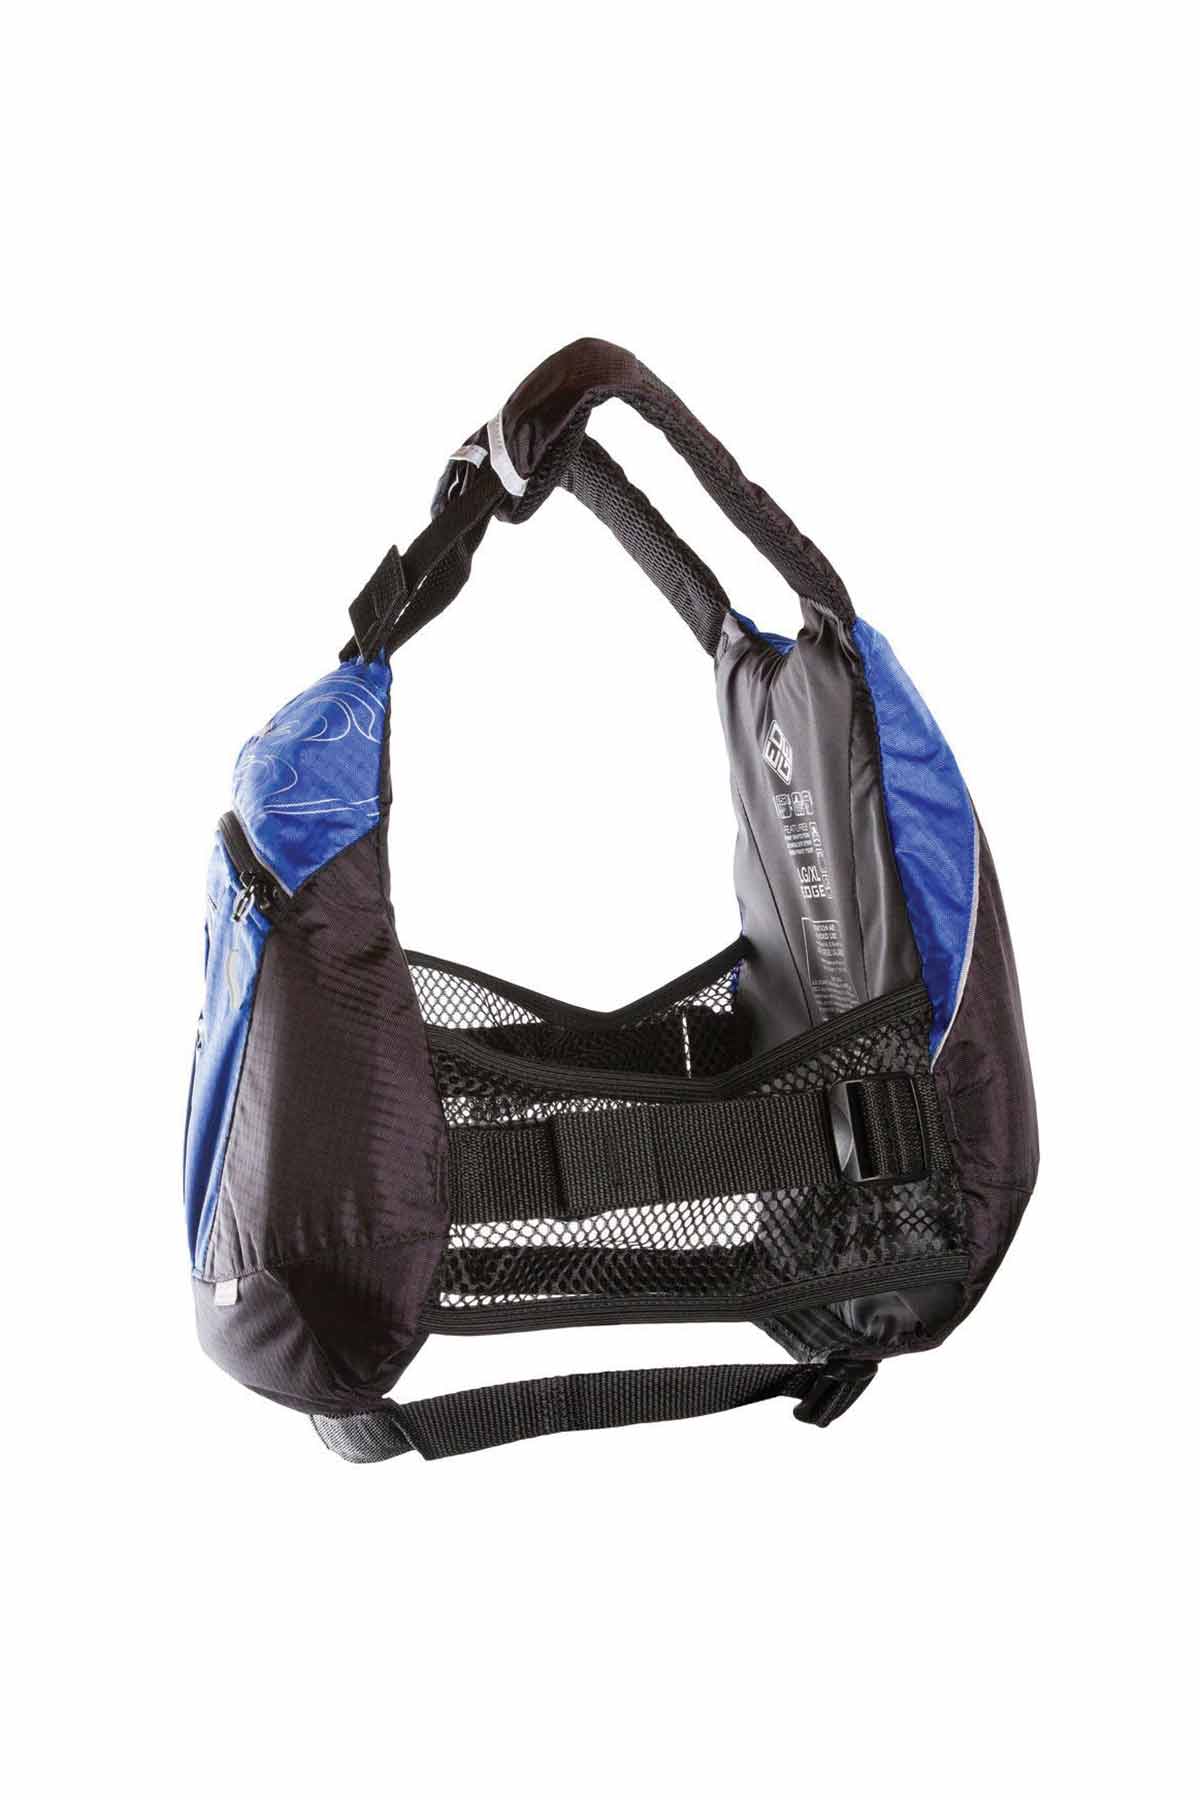 Stohlquist Edge Whitewater PFD Blue Side View